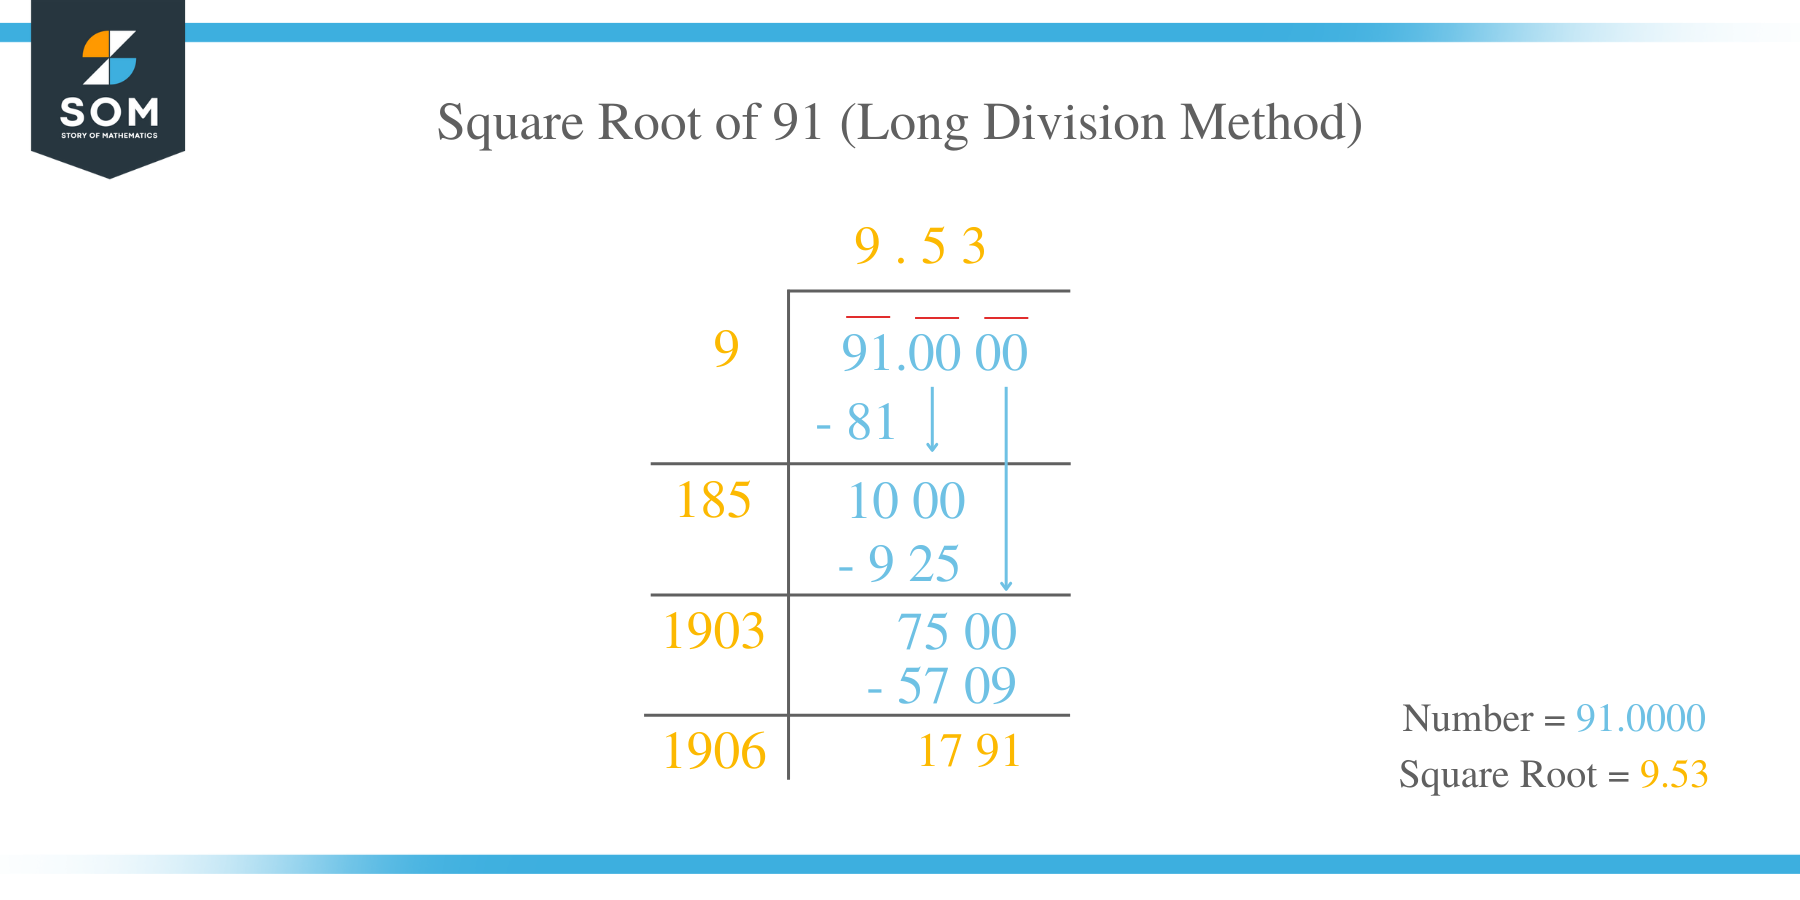 Square Root of 91 by Long Division Method